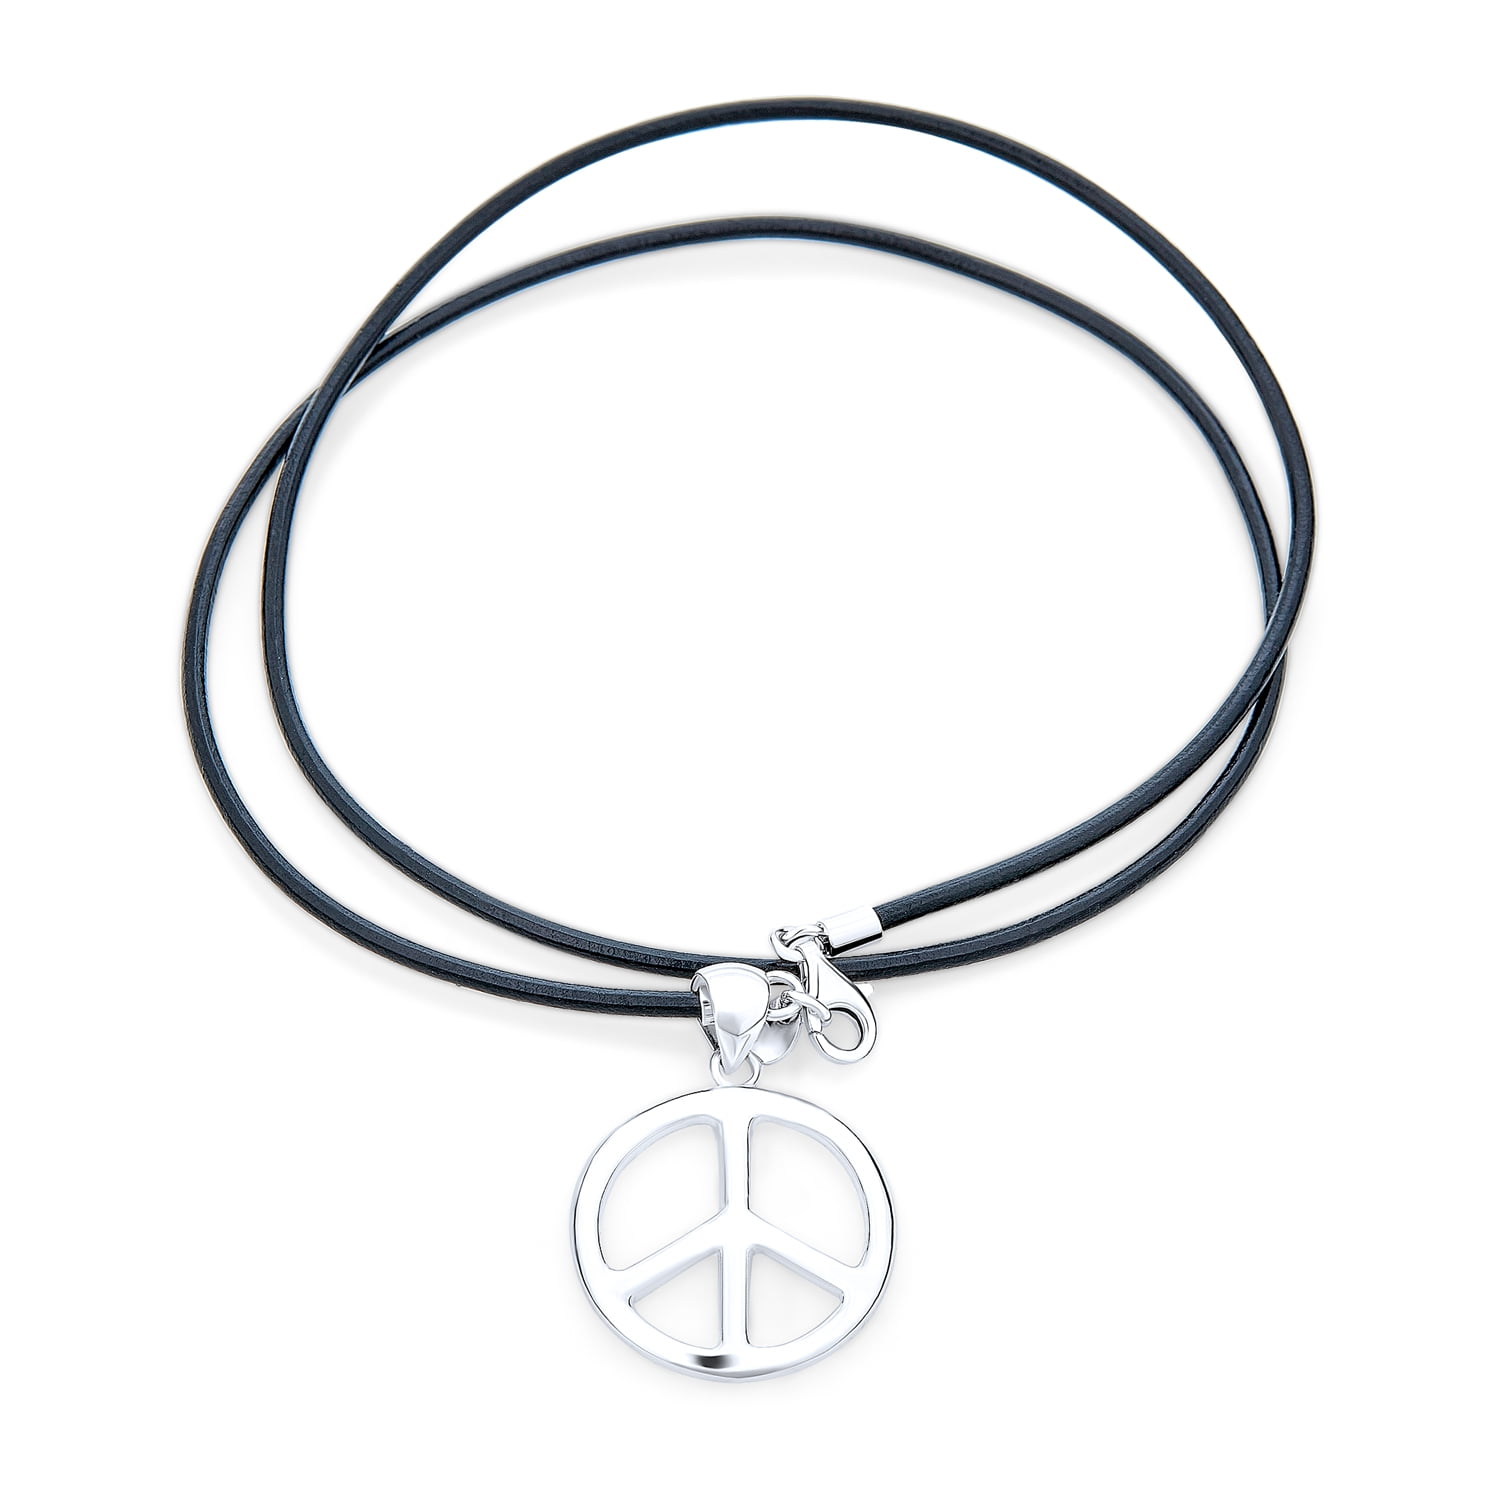 Metal Color: only Pendant Davitu Wholesale 10pcs Hippie Stainless Steel Peace Sign Charm Pendant Necklace for Men Steel Jewelry ST035